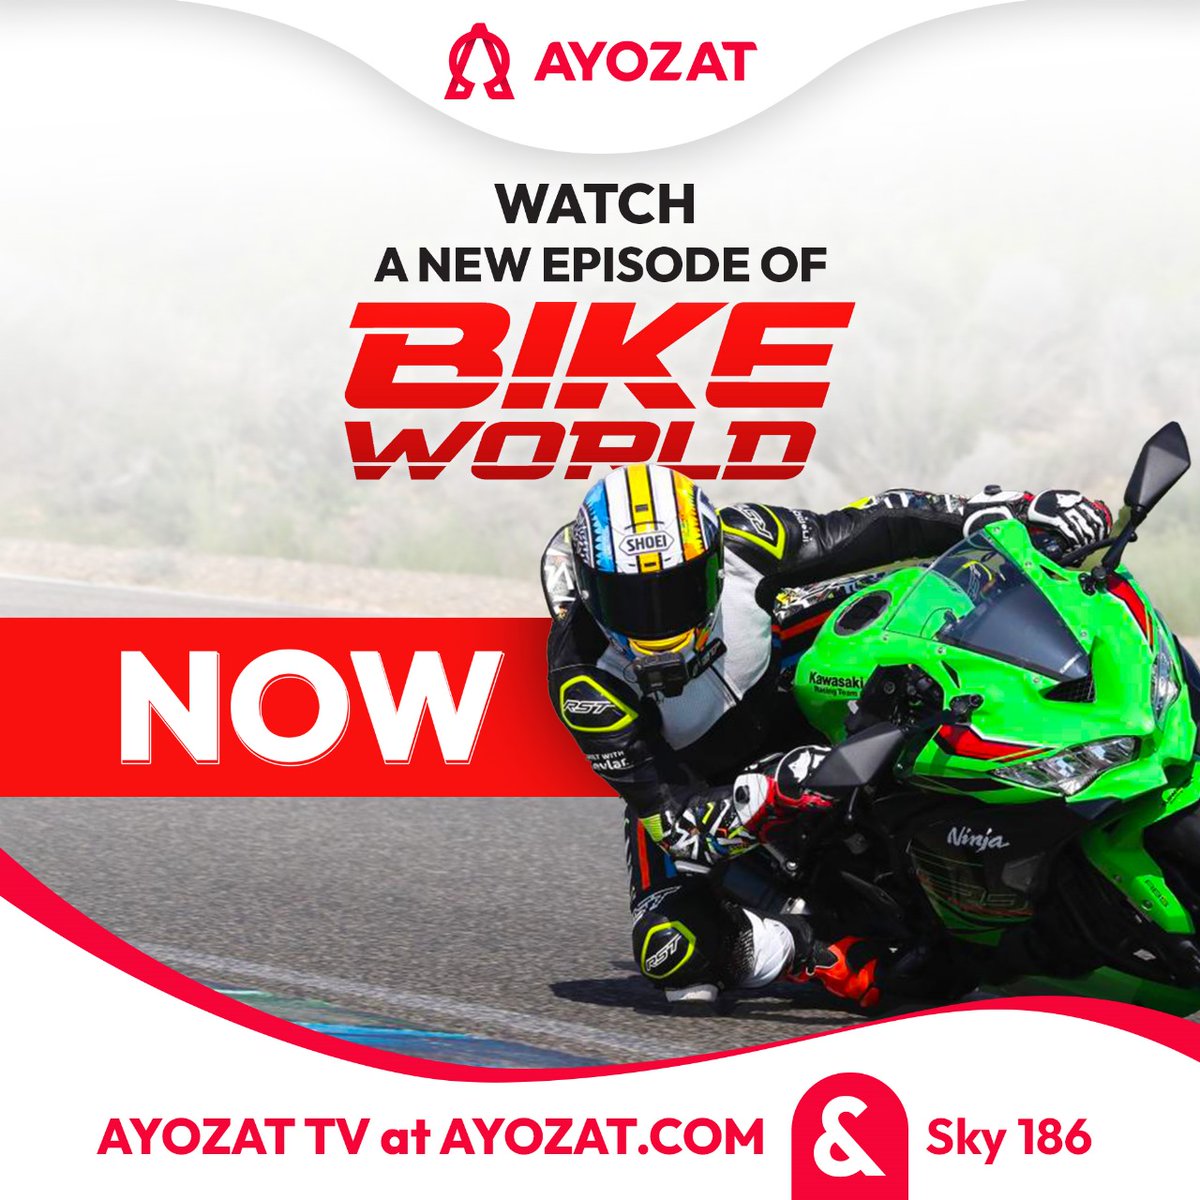 Attention all thrill-seekers! The wait is over! Tune in now for Bike World airing on AYOZAT TV at Sky 186 and streaming on ayozat.com. Don't miss a moment of the action! #bikeworld #motorbikes #motorsport #motorbikelife @Bikeworldtvshow